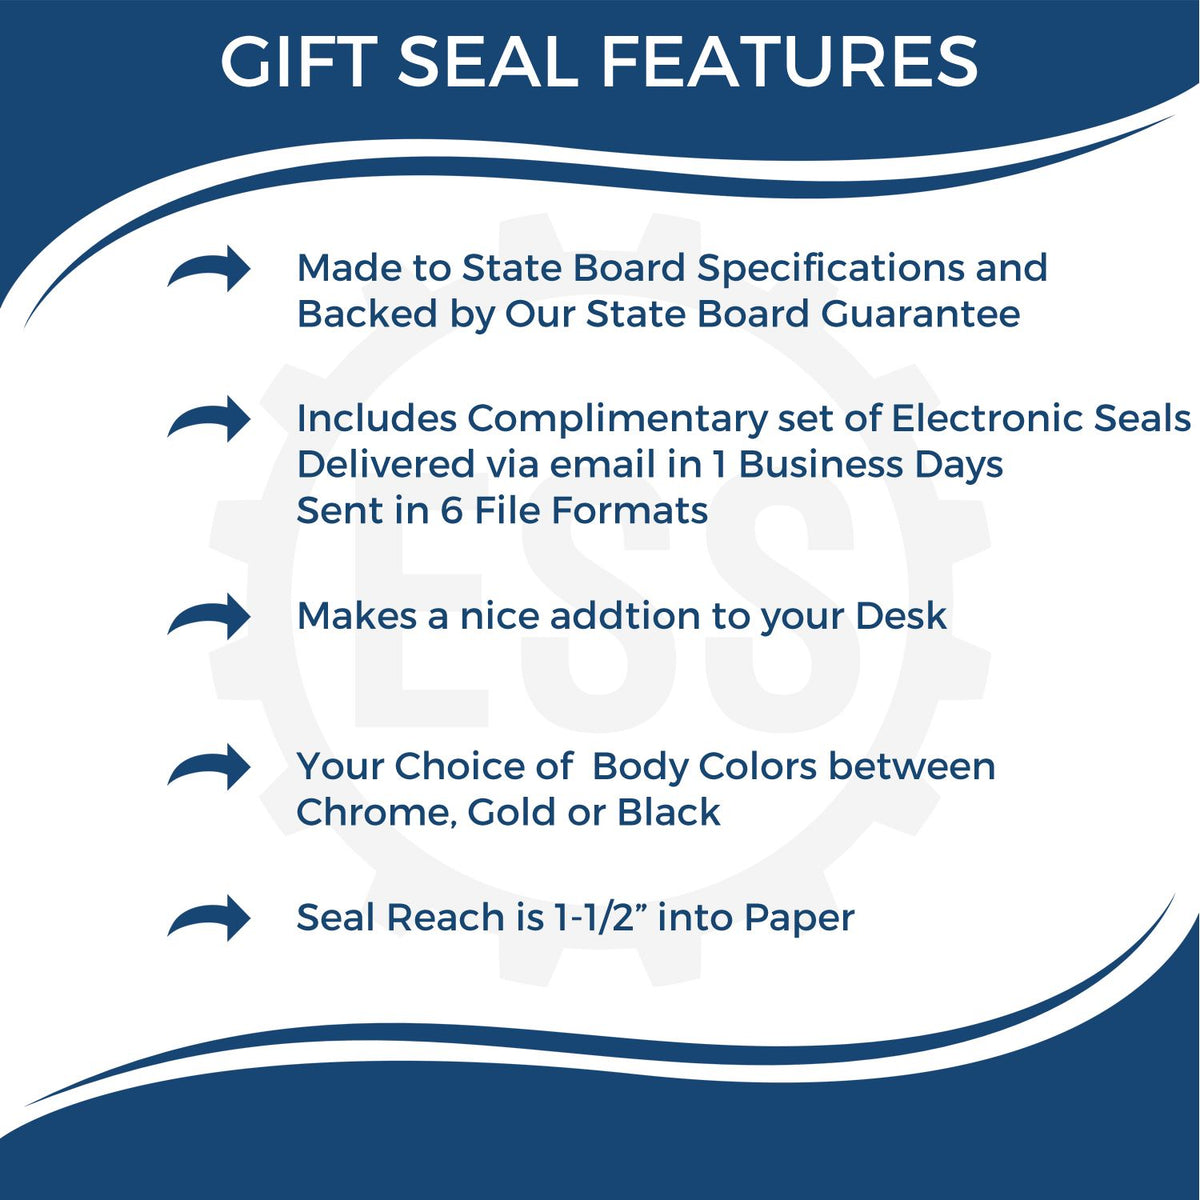 A picture of an infographic highlighting the selling points for the Gift New York Engineer Seal